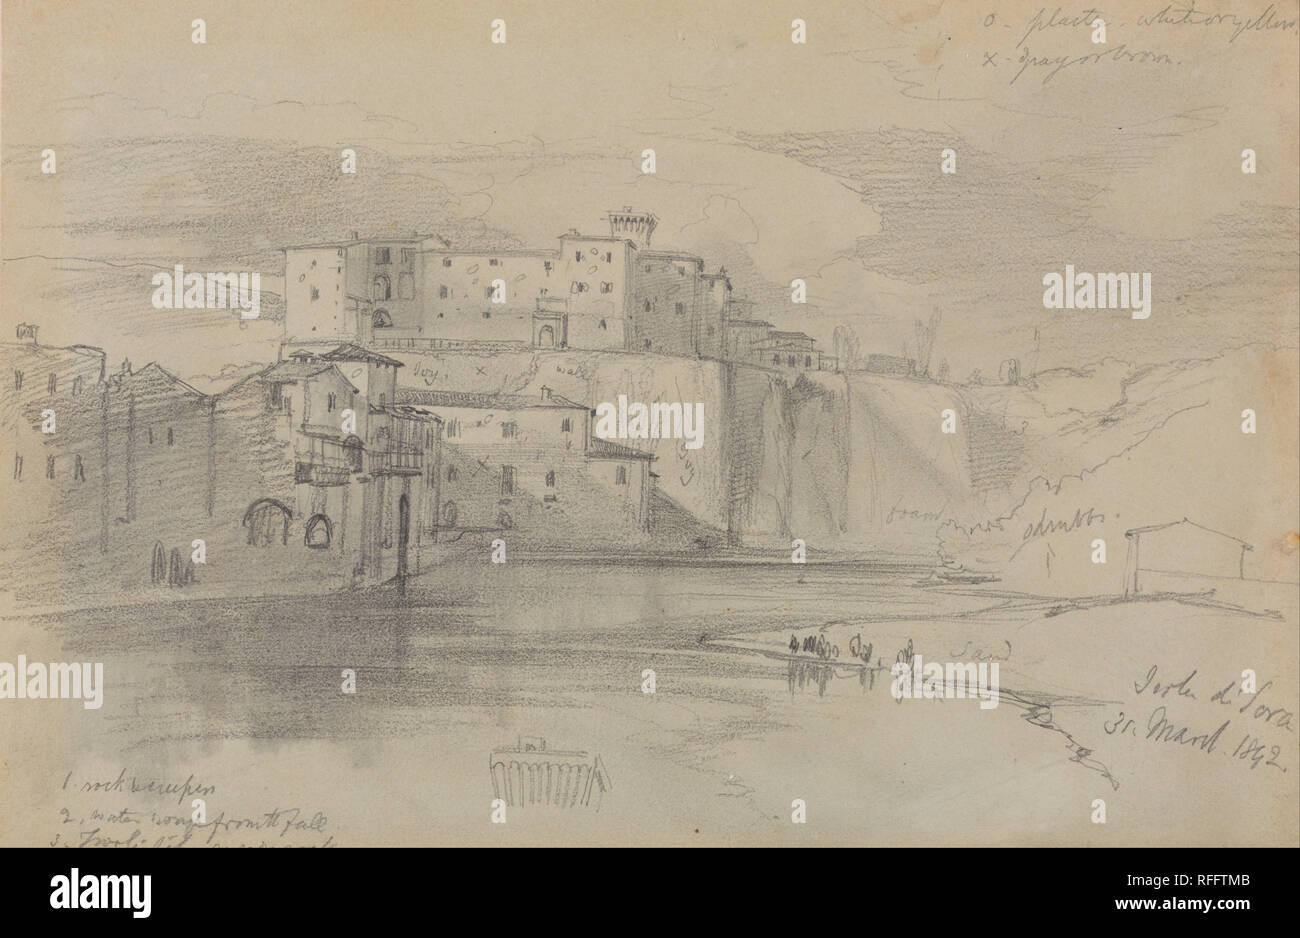 Isola di Sora, 31 Mar. 1842. Date/Period: 1842. Drawing. Graphite with stumping on moderately thick, moderately textured, gray wove paper. Height: 168 mm (6.61 in); Width: 257 mm (10.11 in). Author: Edward Lear. Stock Photo